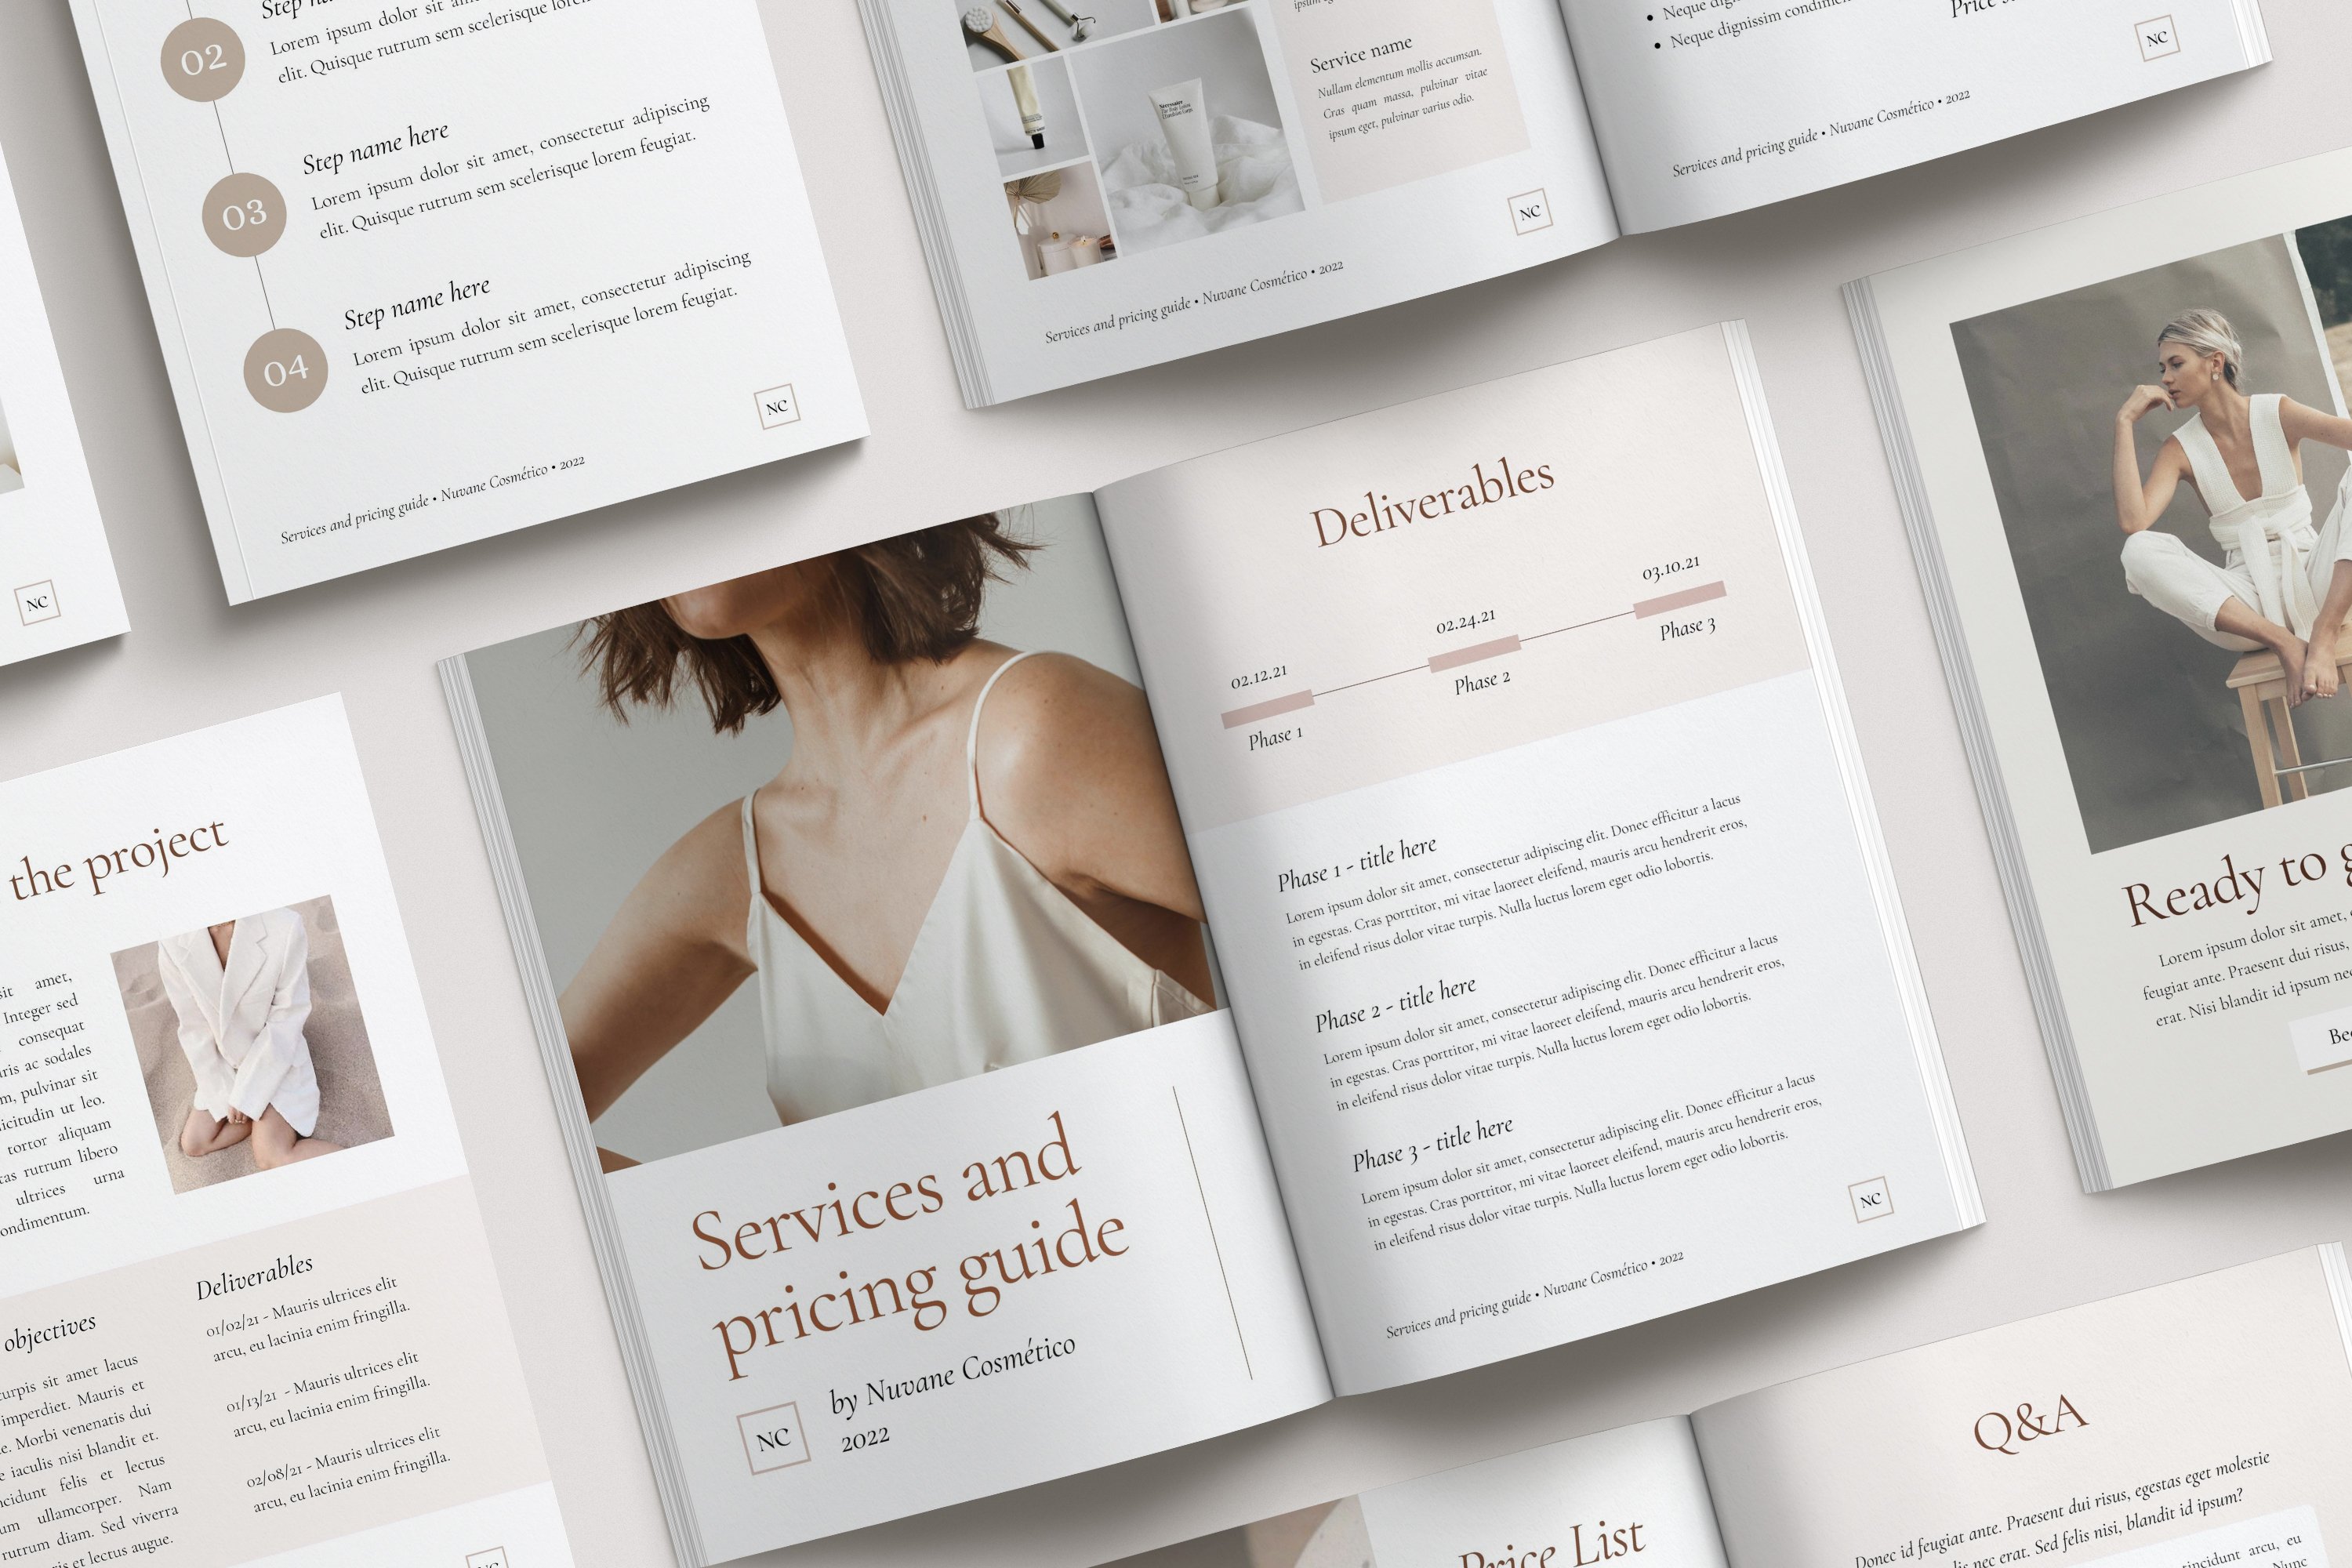 Services & Pricing Guide Template cover image.